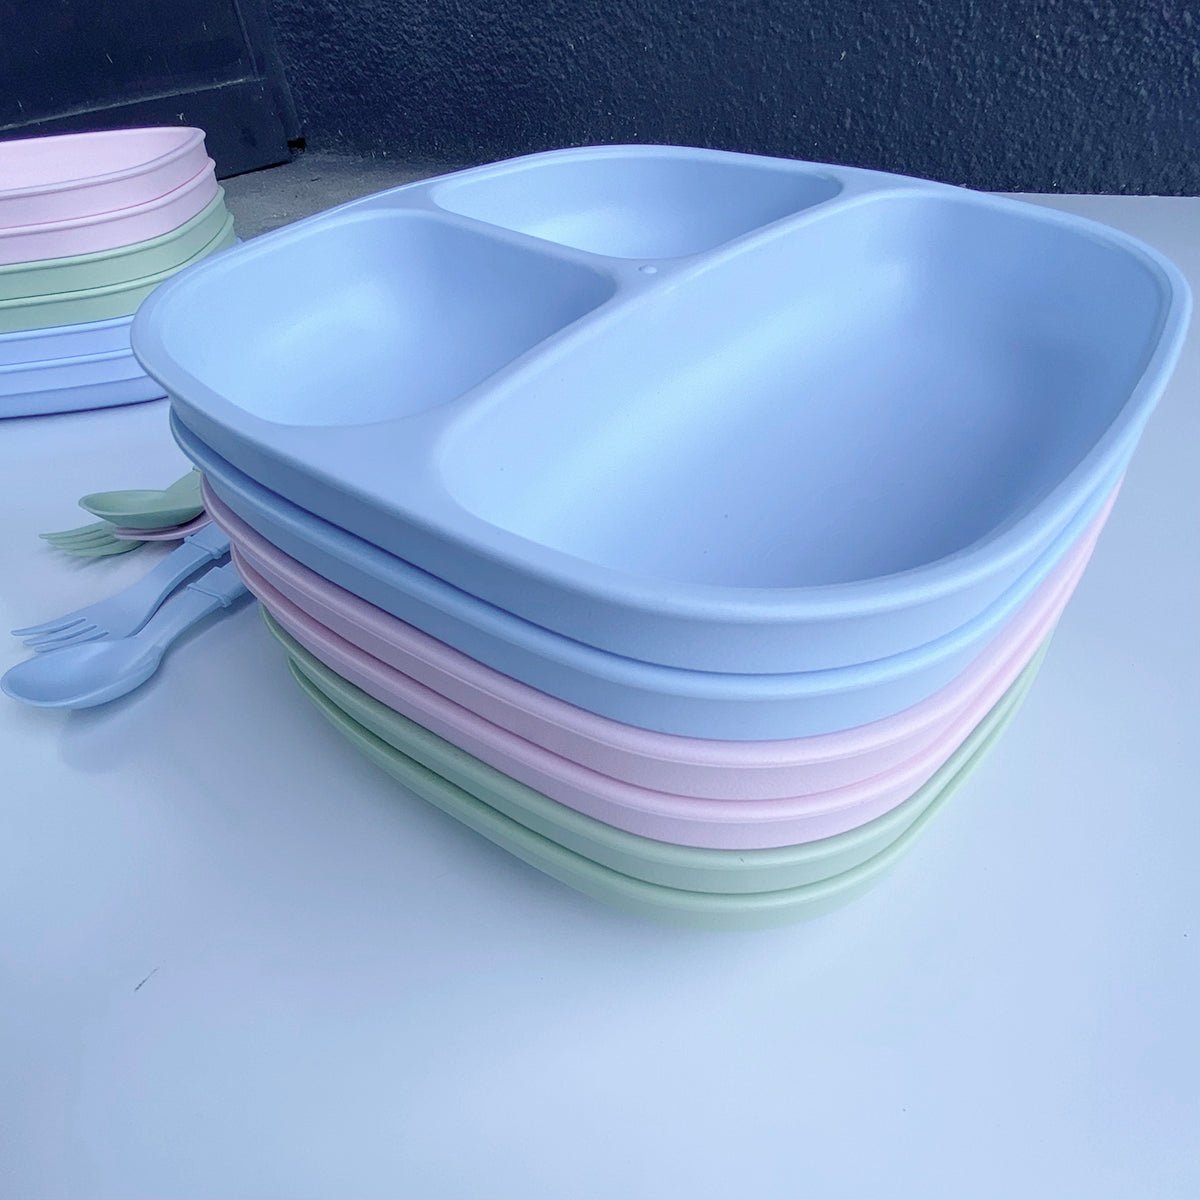 Replay Divided Plate Pastel | Replay